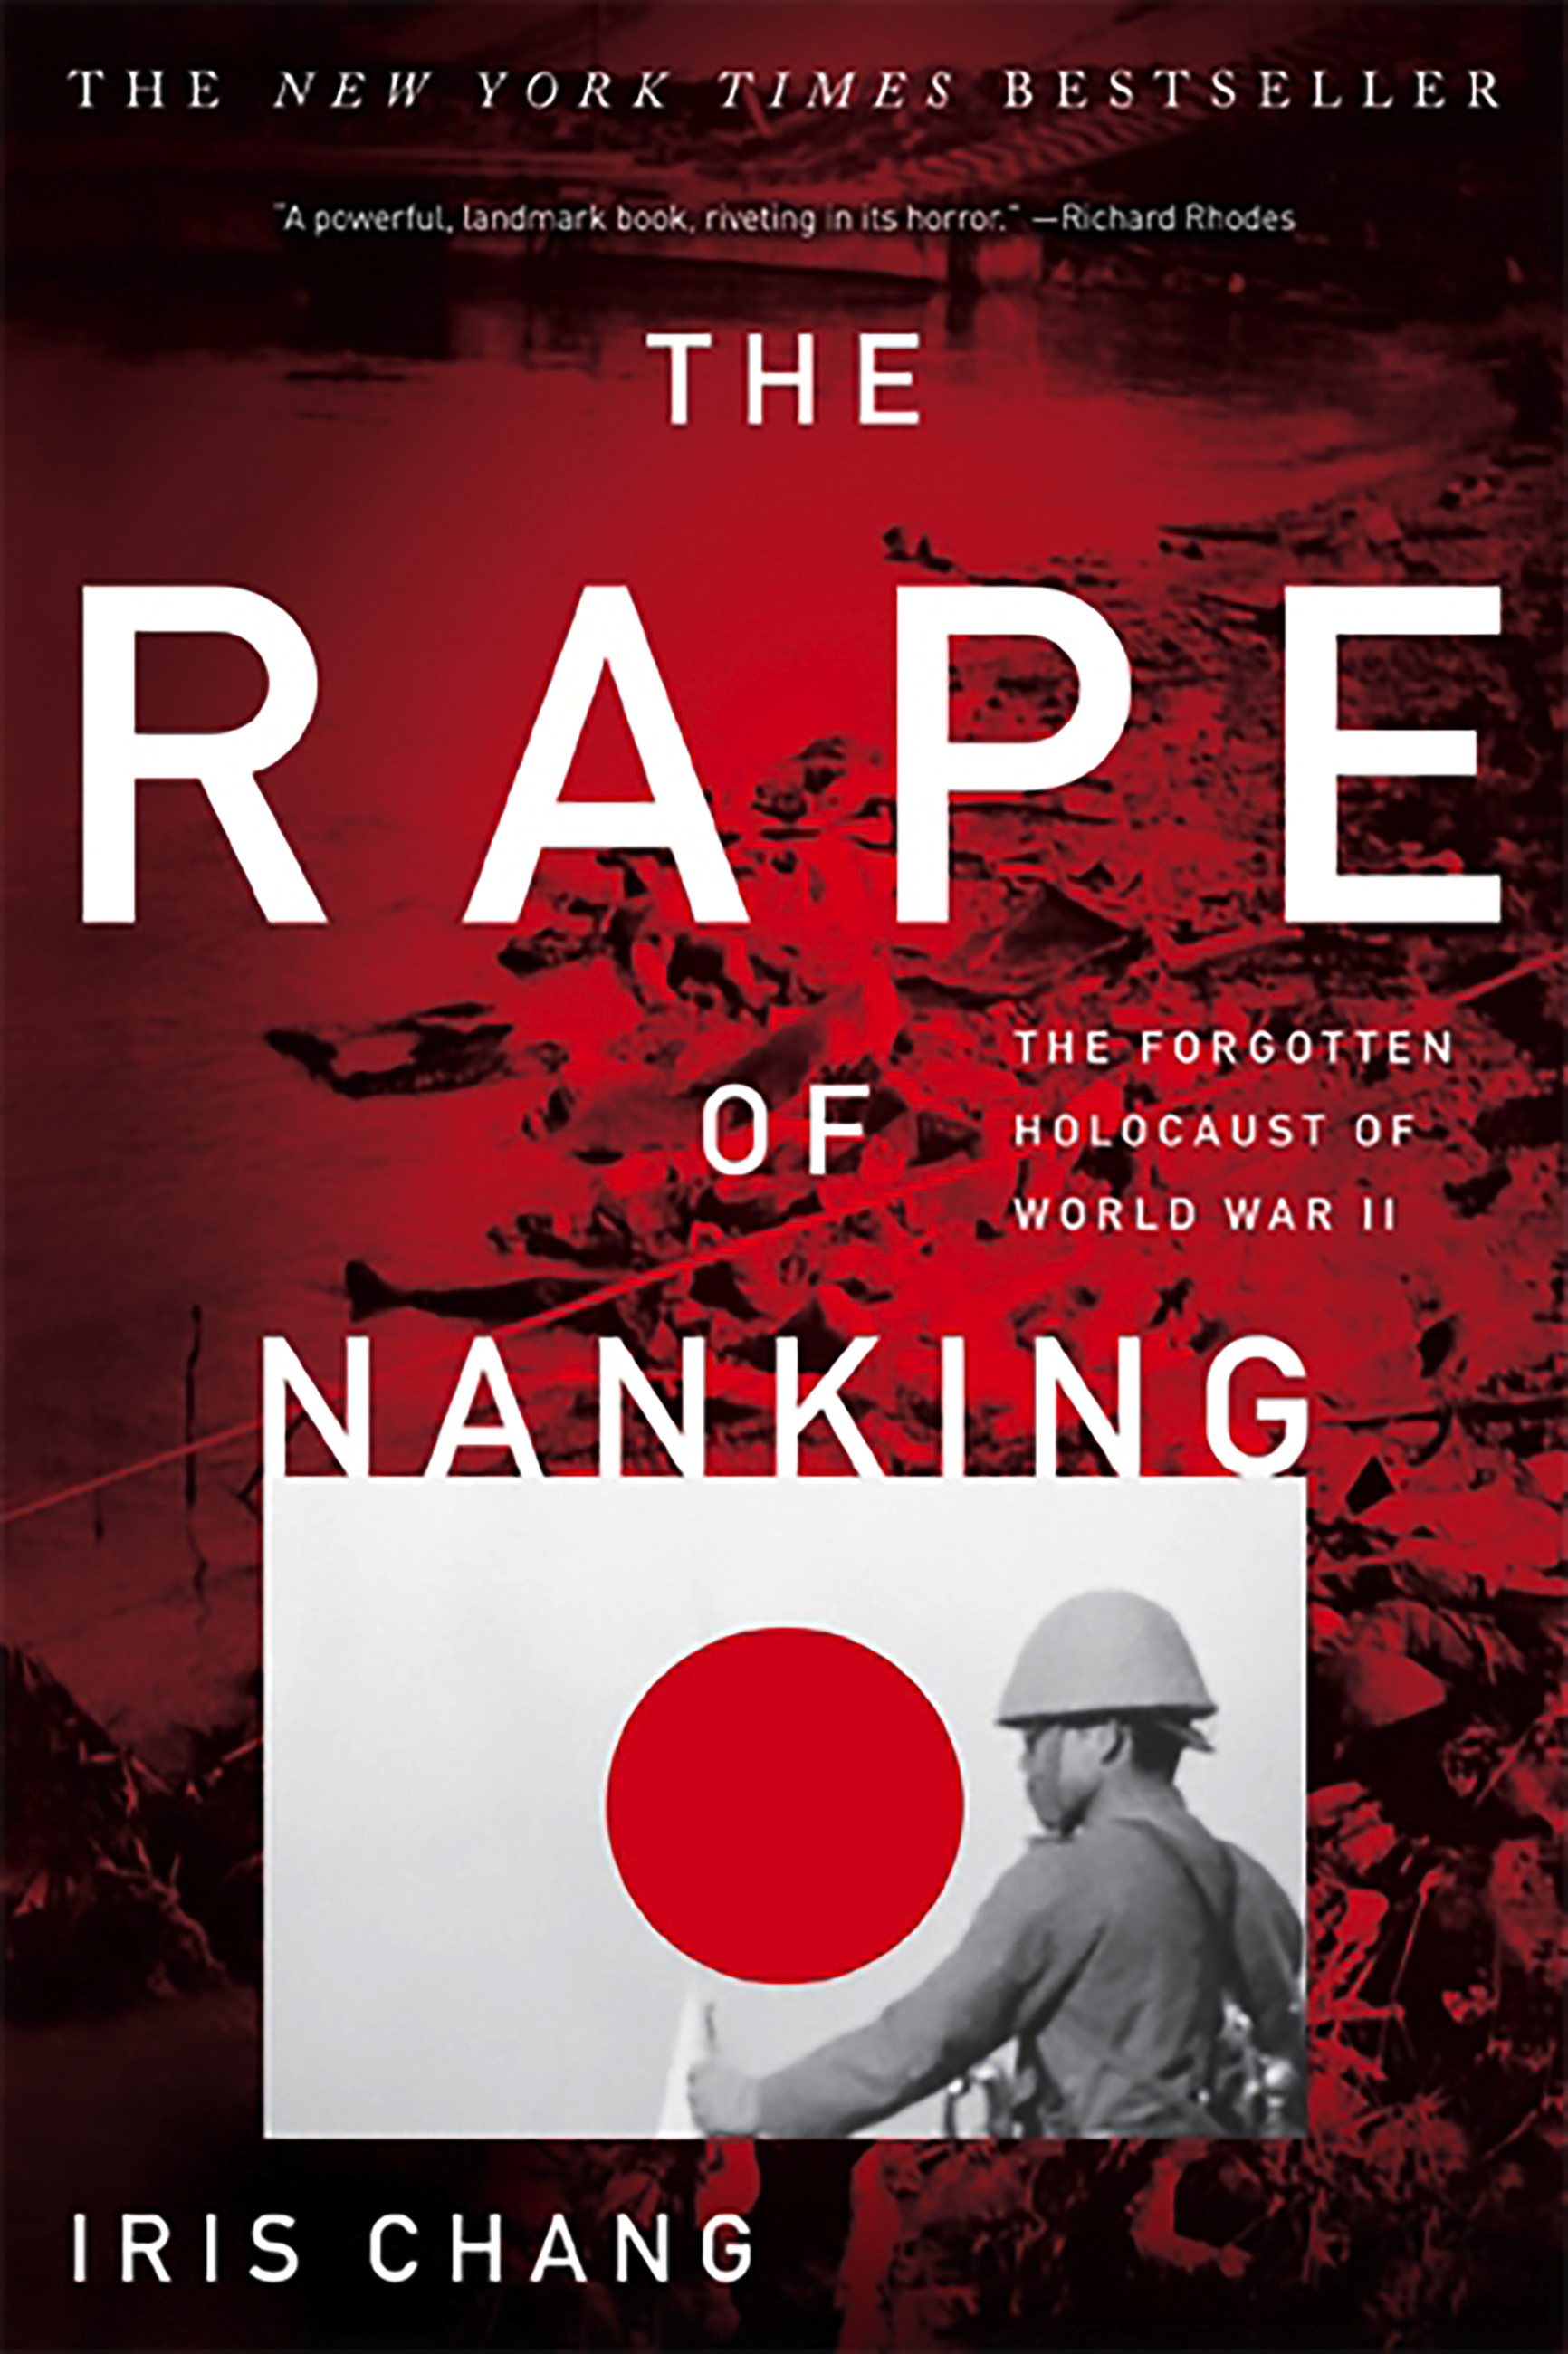 Japanese School Girl Raped In Bus Full Hd Porn - The Rape of Nanking by Iris Chang | Hachette Book Group